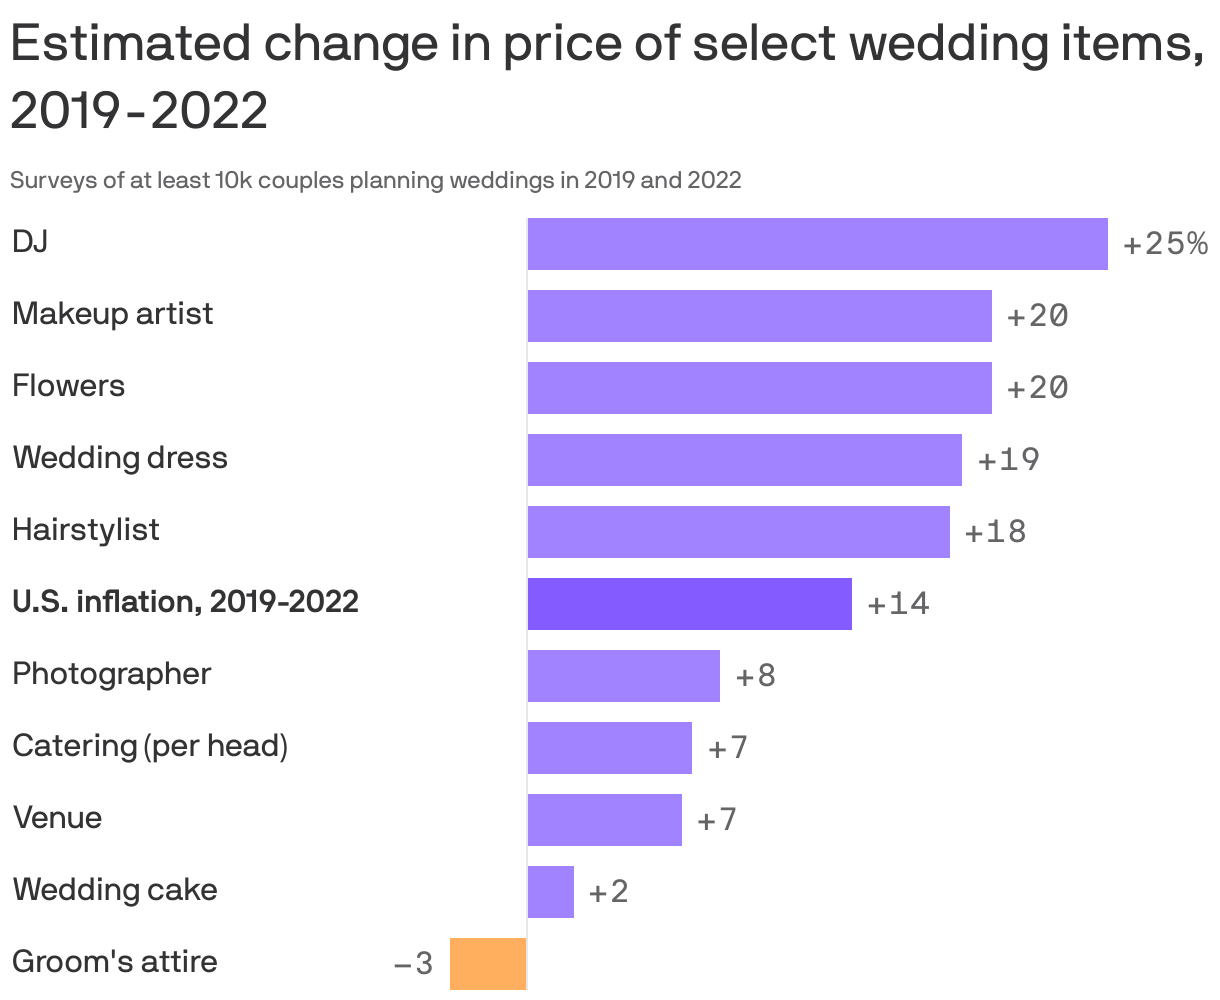 Estimated change in price of select wedding items, 2019-2022